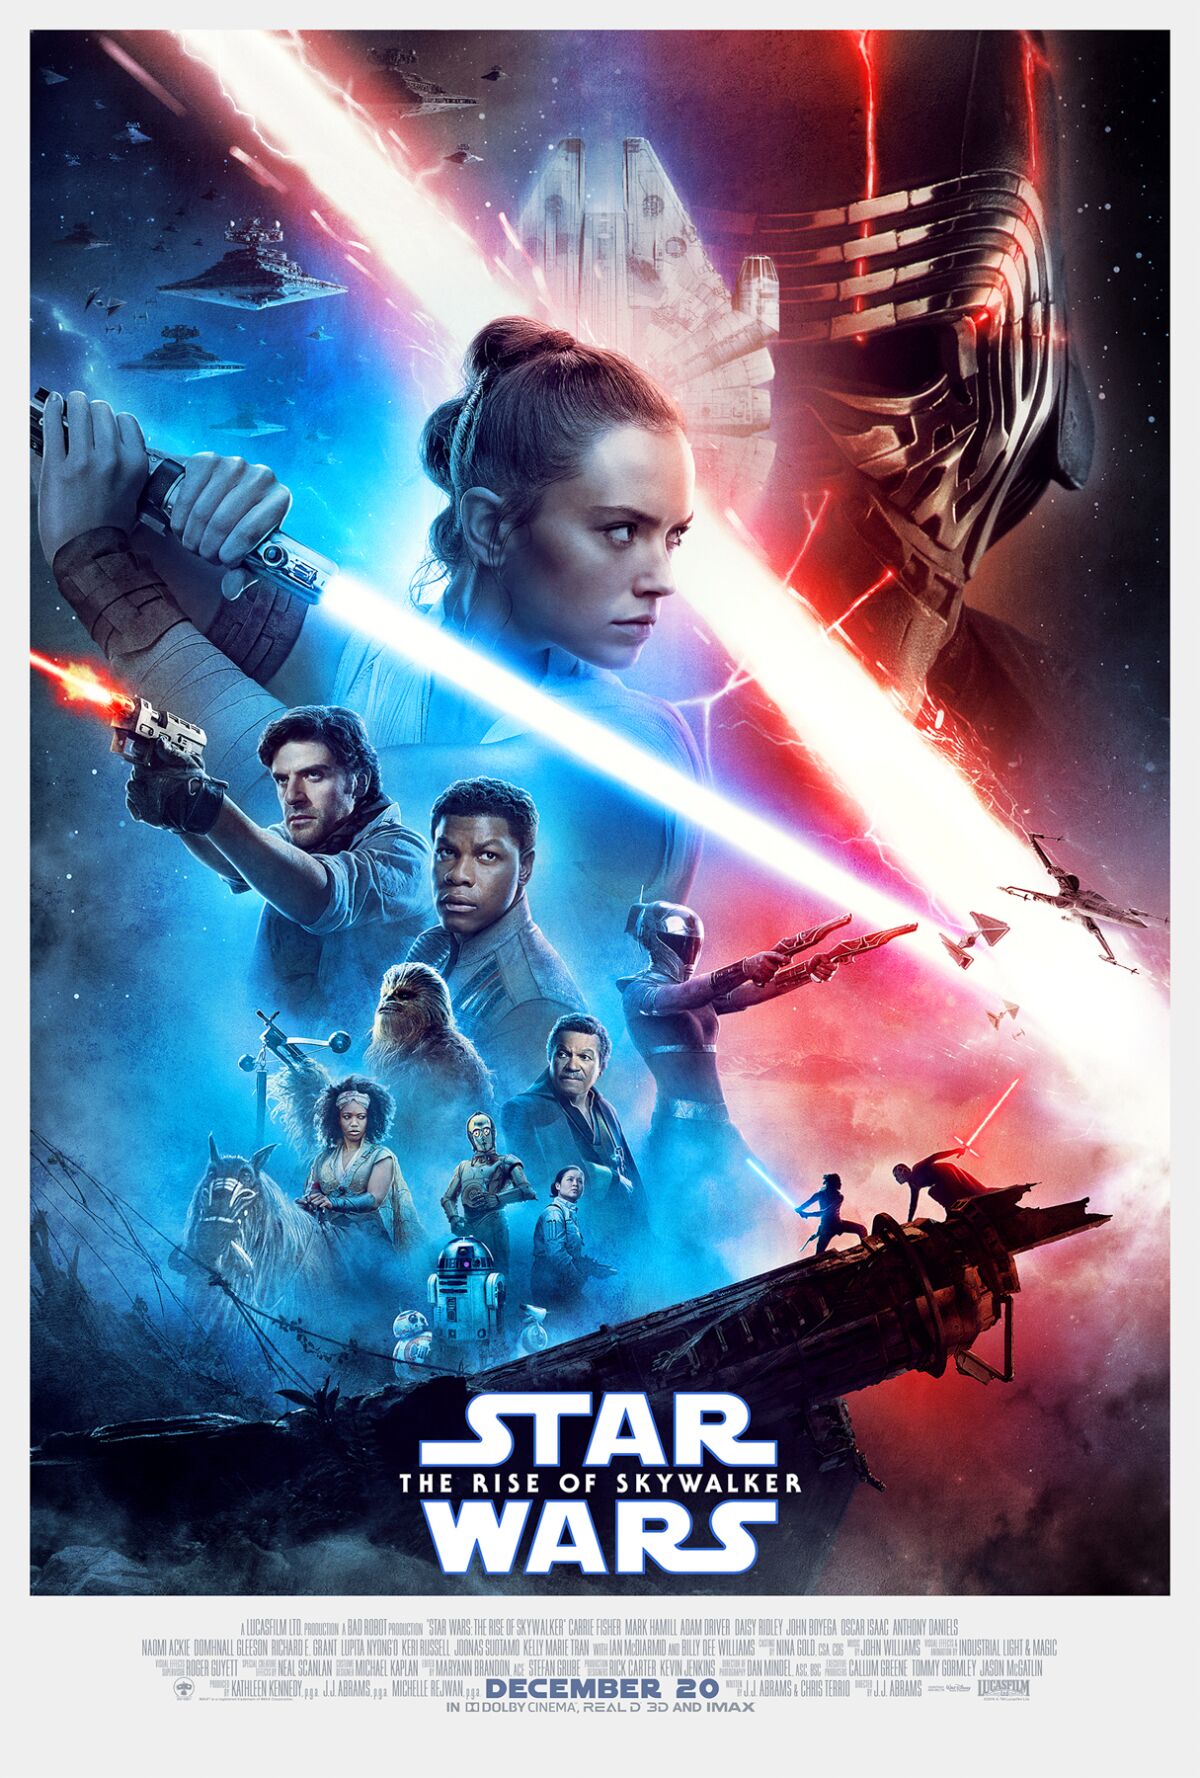 The poster for “STAR WARS: The Rise of Skywalker”